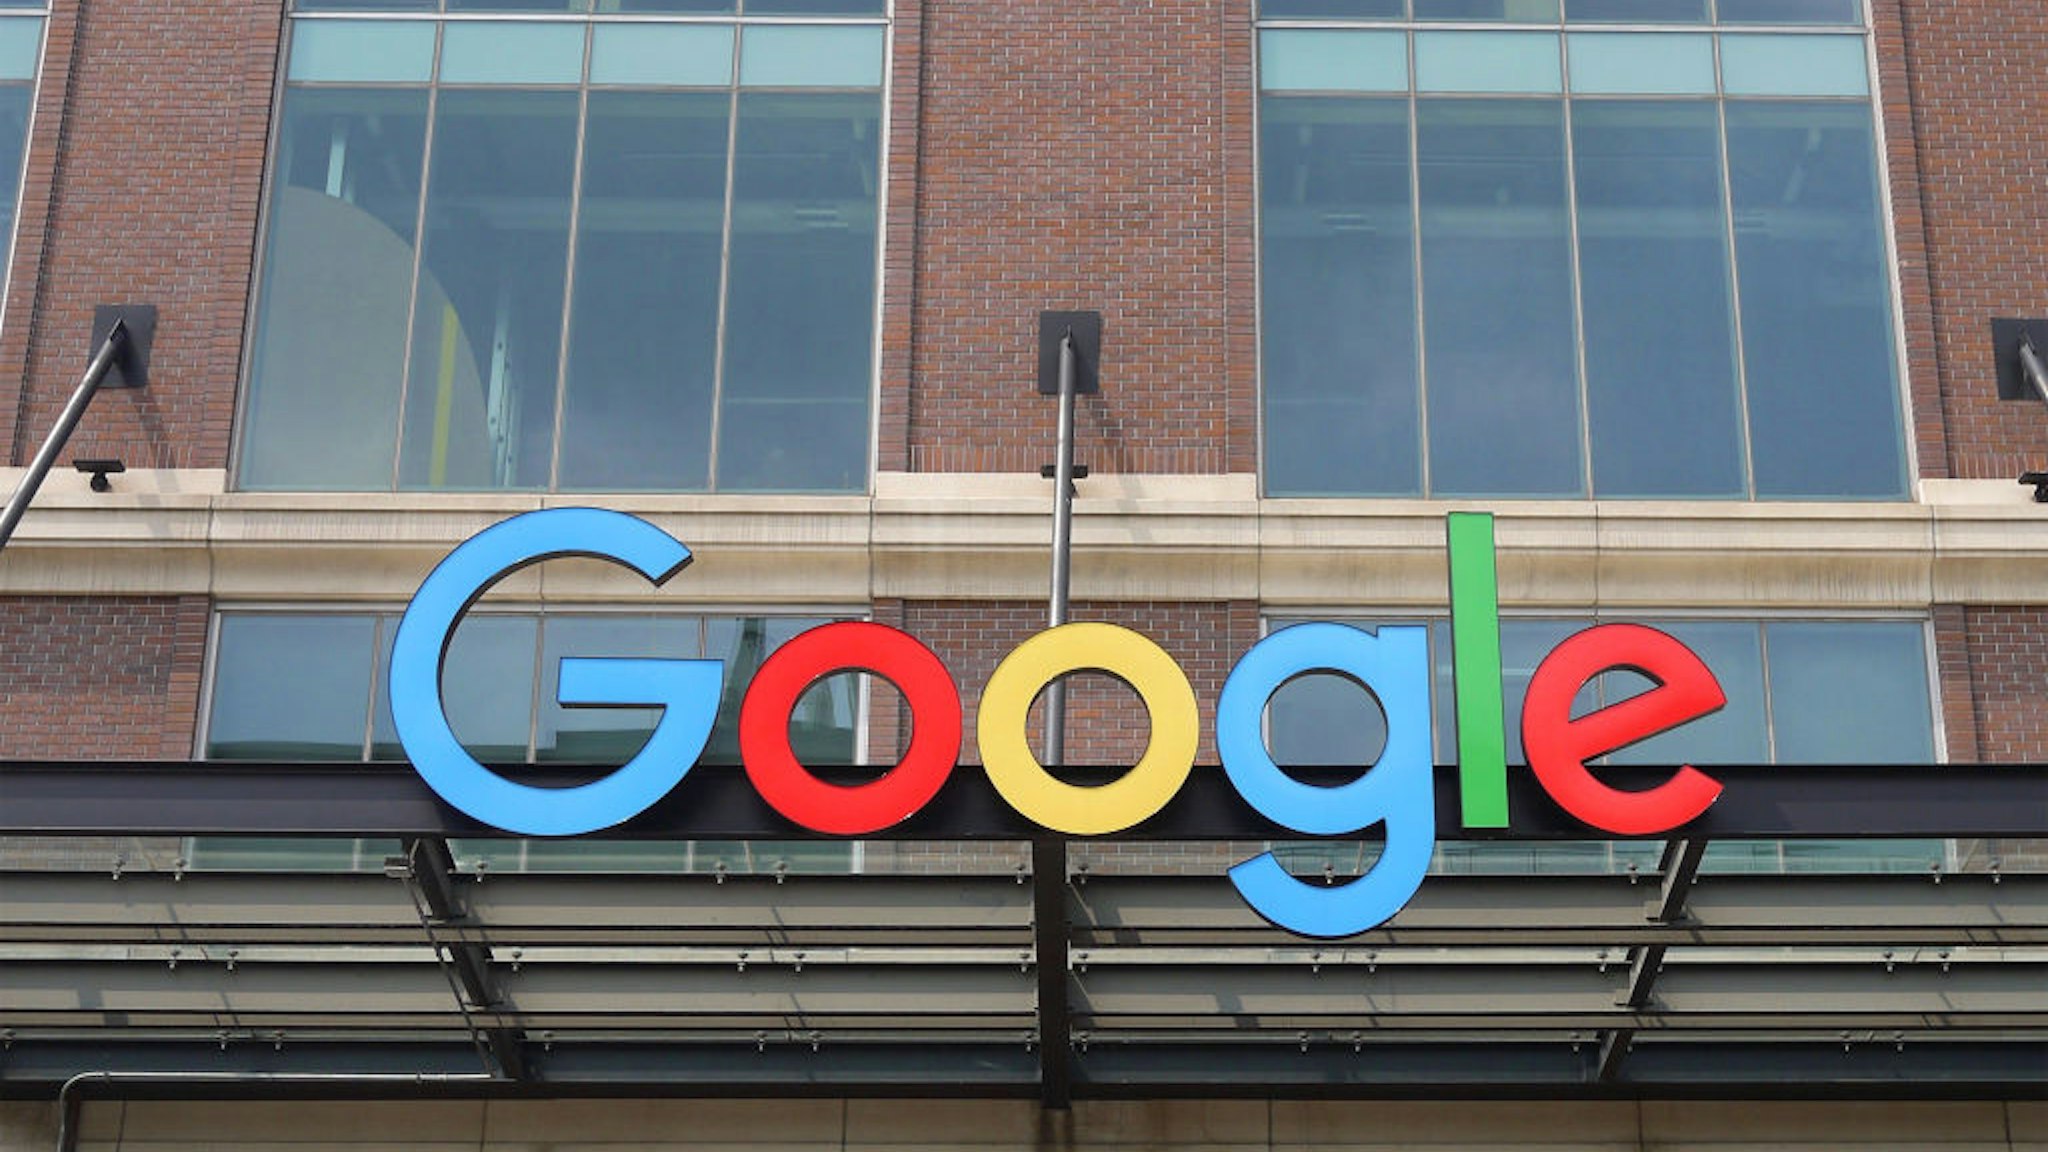 View of the Google company logo on the awning of a building (at 320 North Morgan Street) in the West Loop neighborhood, Chicago, Illinois, April 2018.